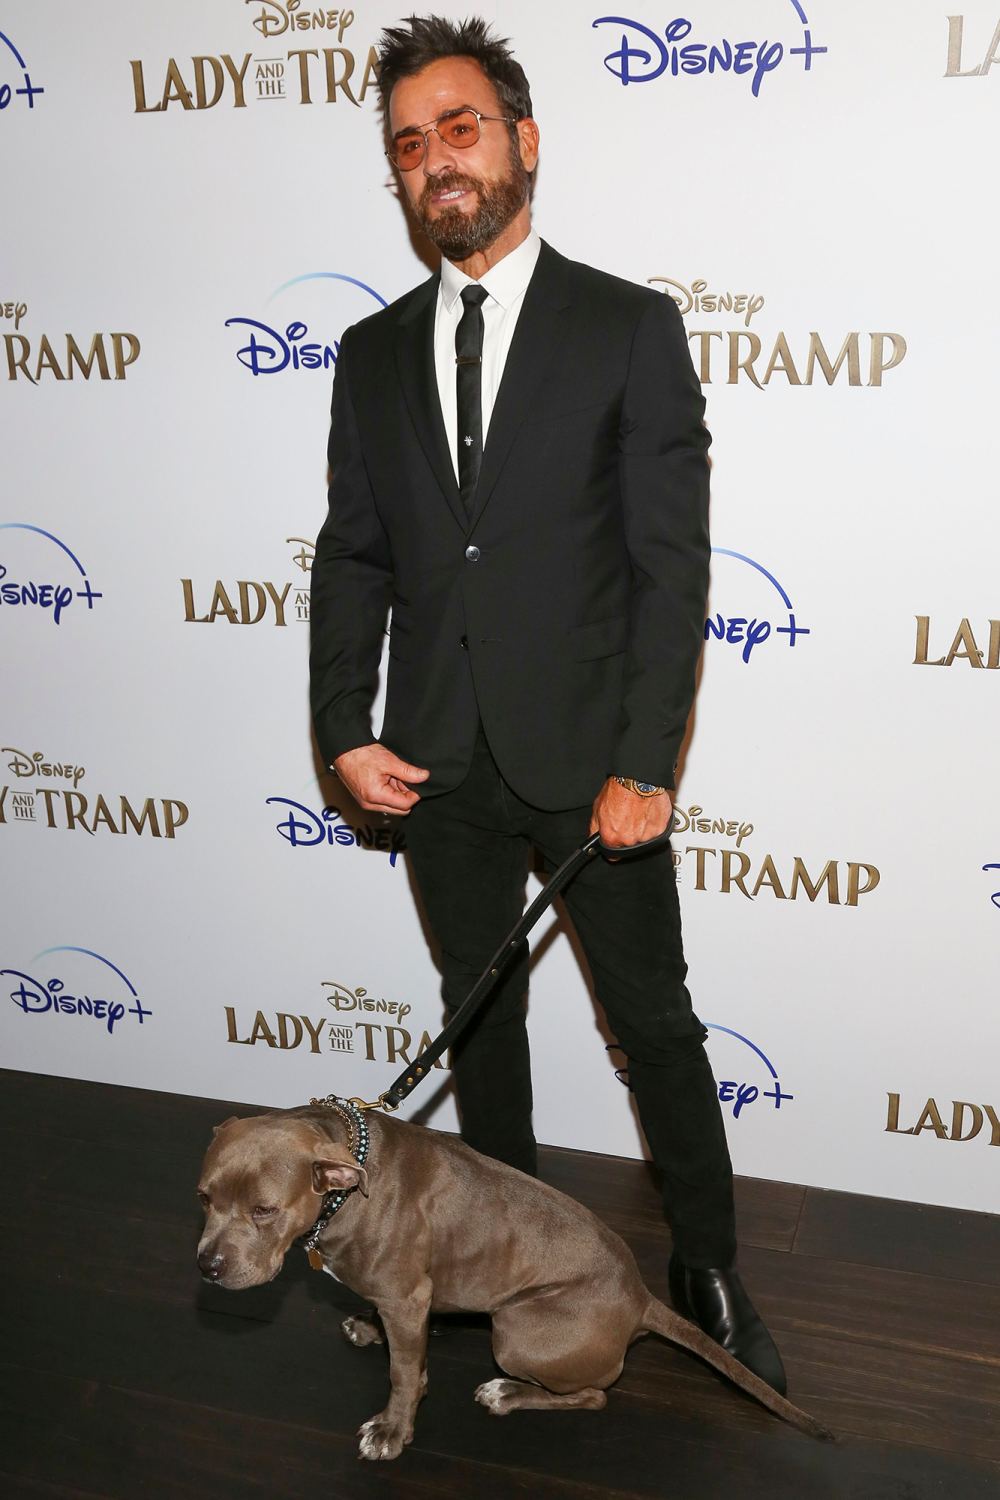 Justin Theroux Recreates ‘Lady and The Tramp’ Moment With Pup Kuma